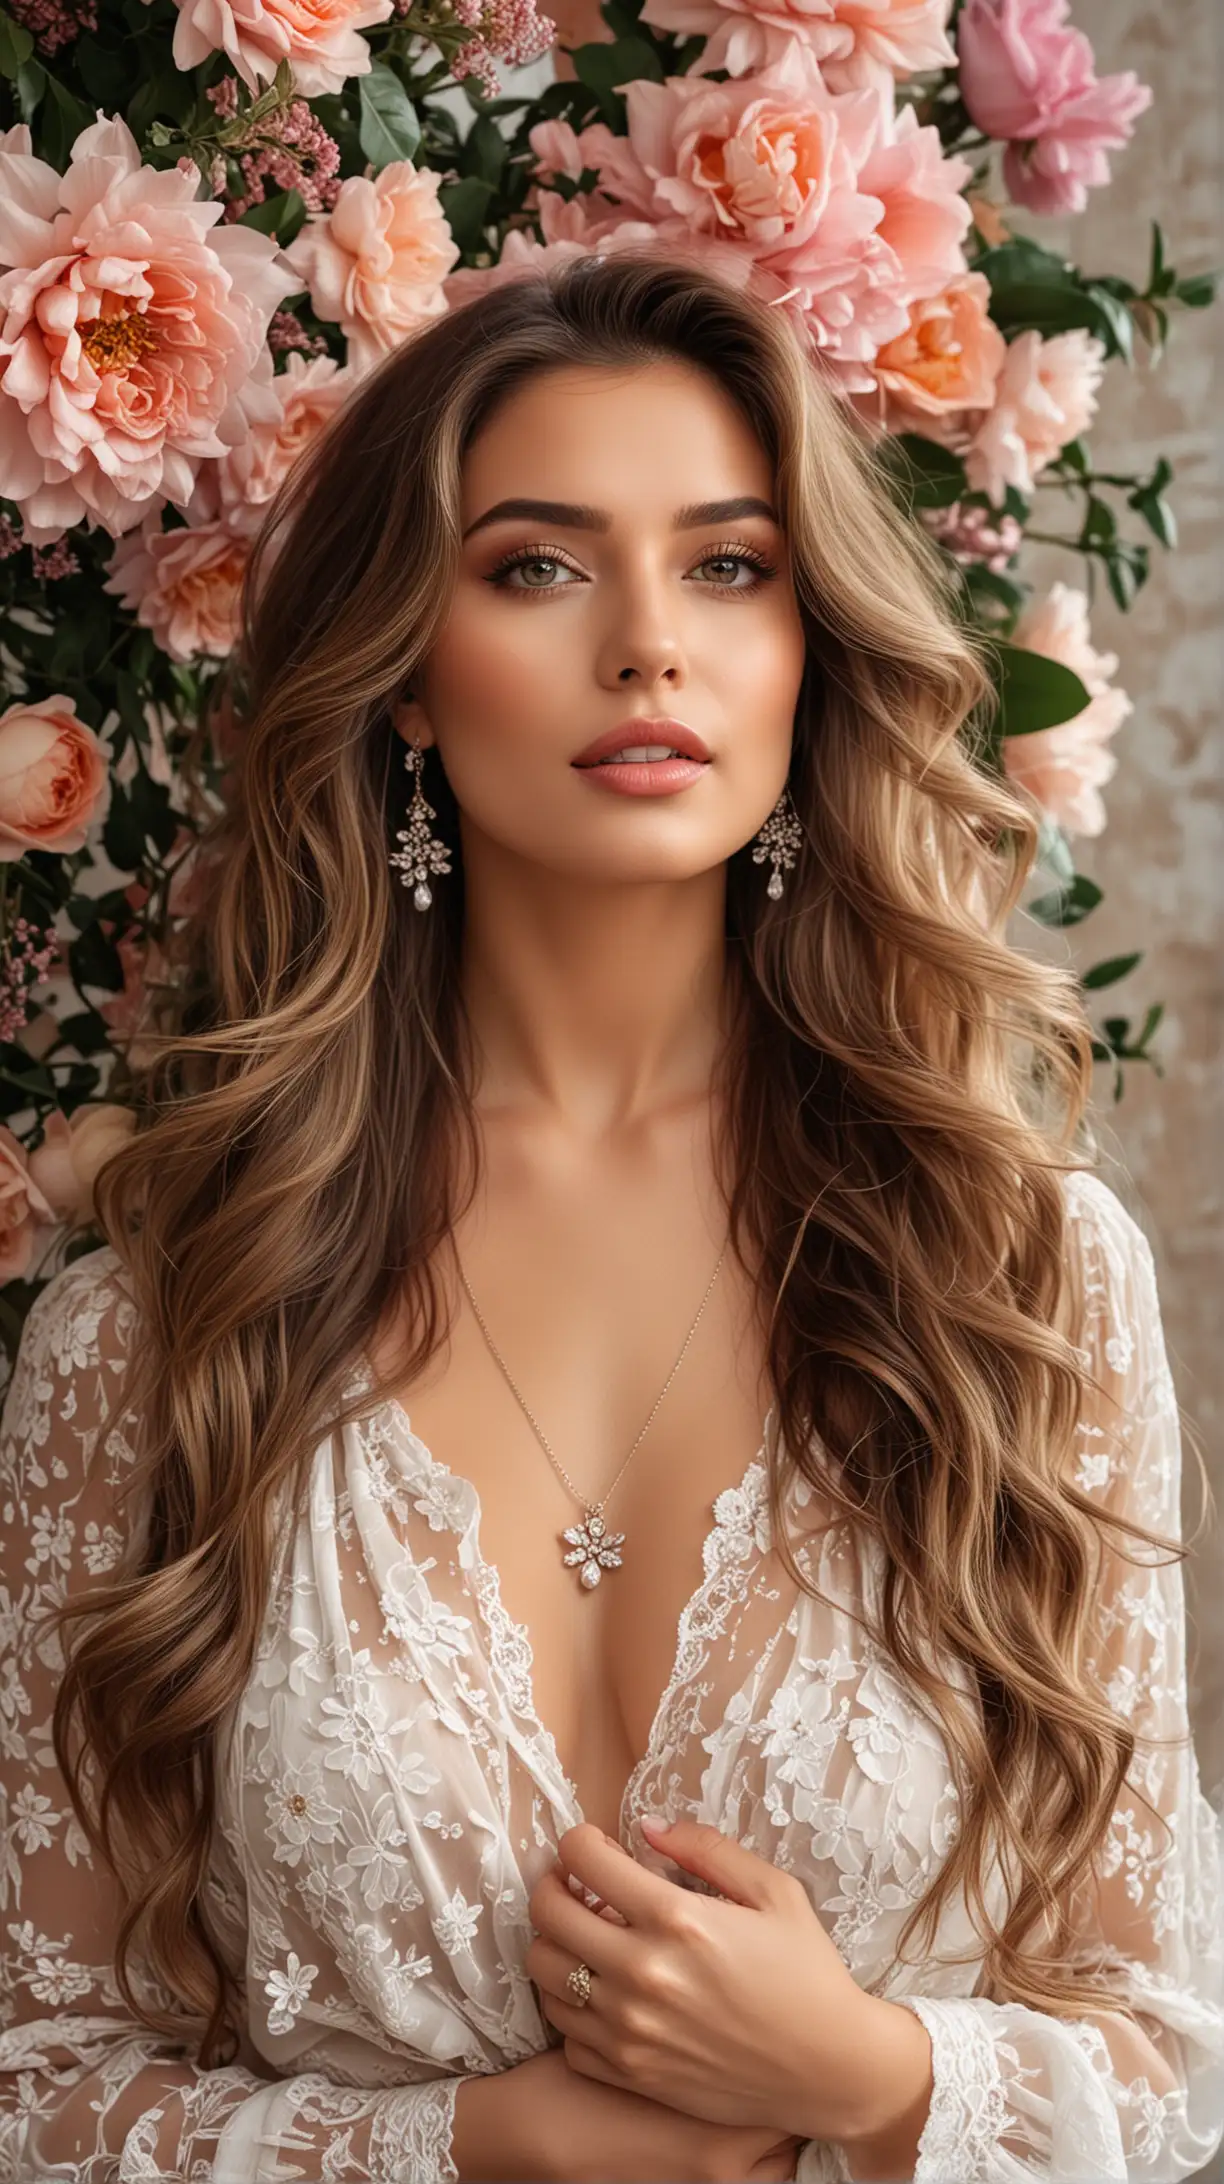 Elegant Woman with Bouquet against Flower Wall